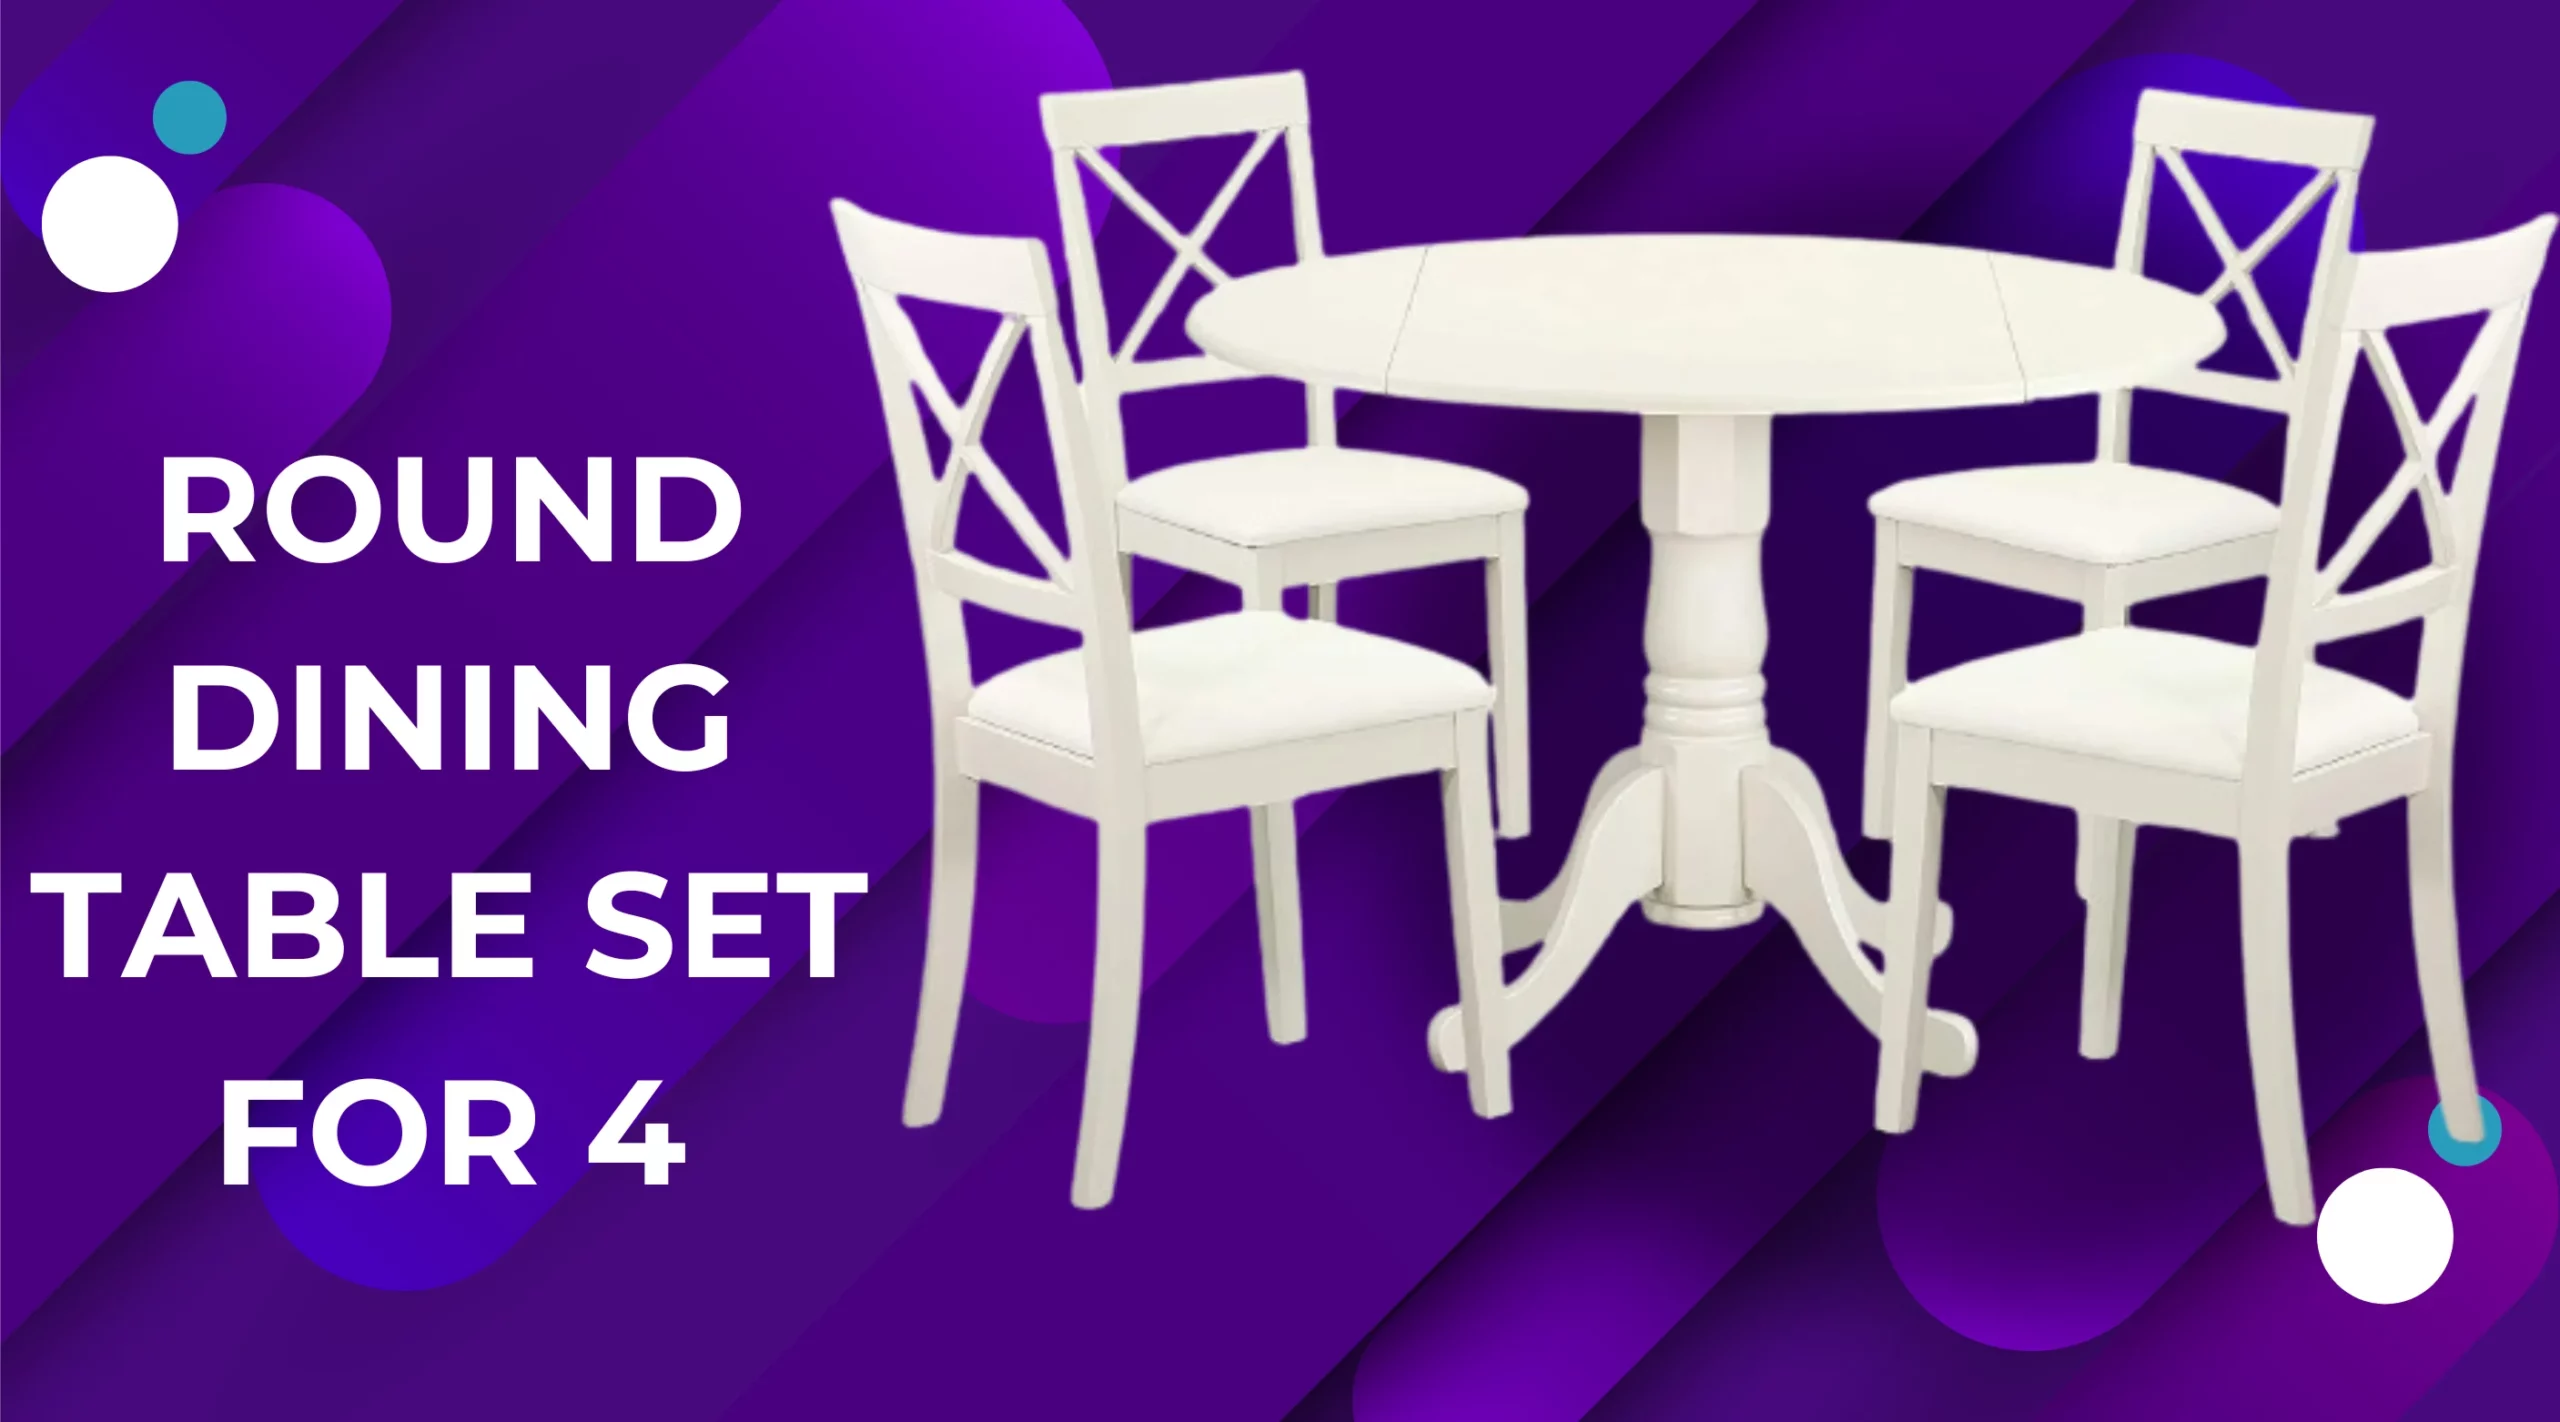 round dining table set for 4